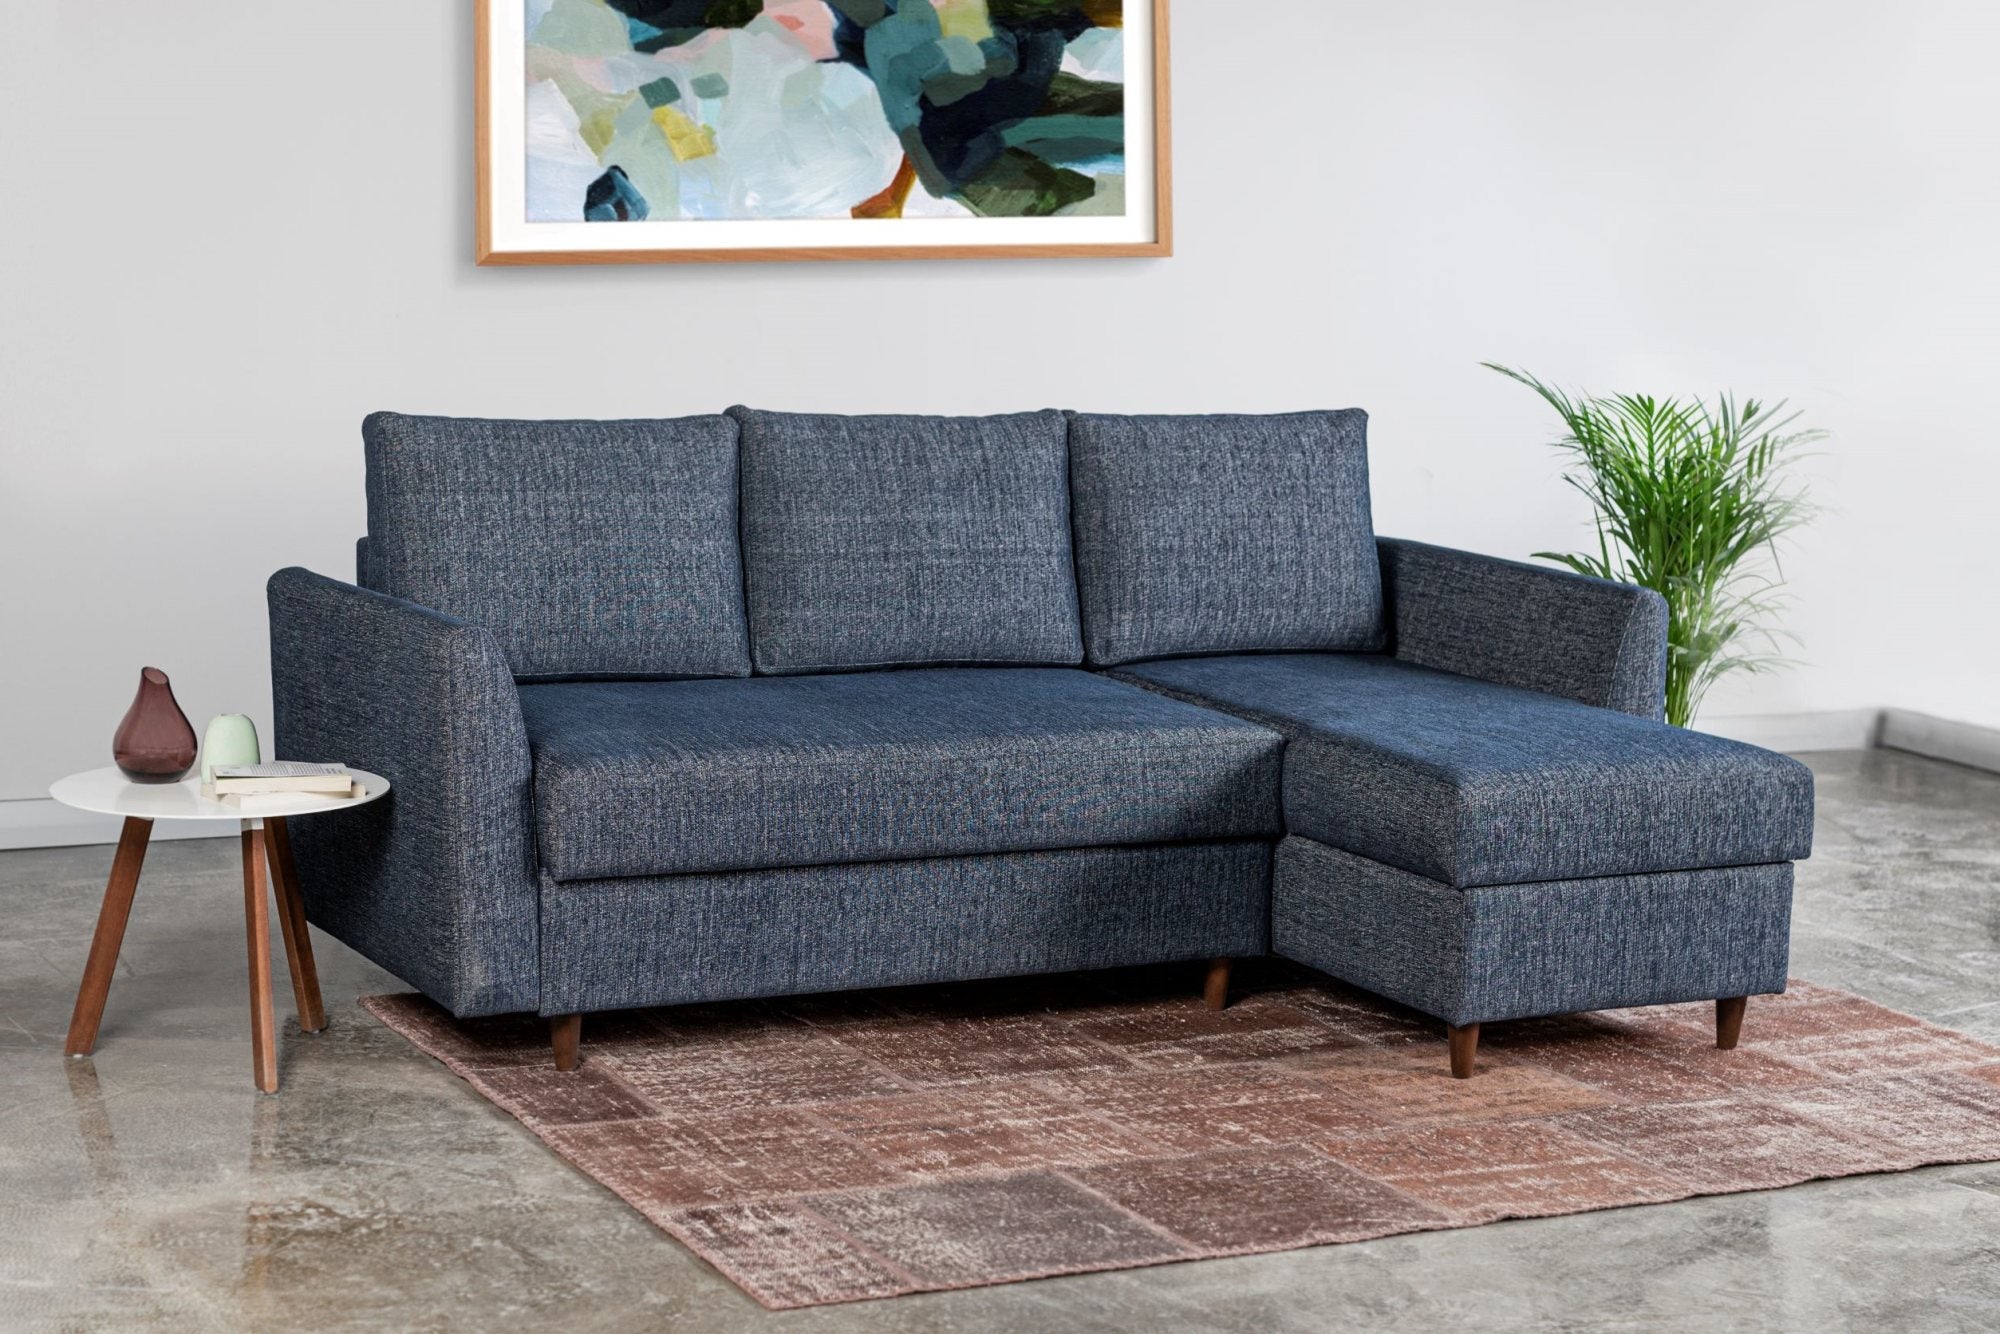 Brixham blue corner sofa bed with right hand ottoman storage in room setting